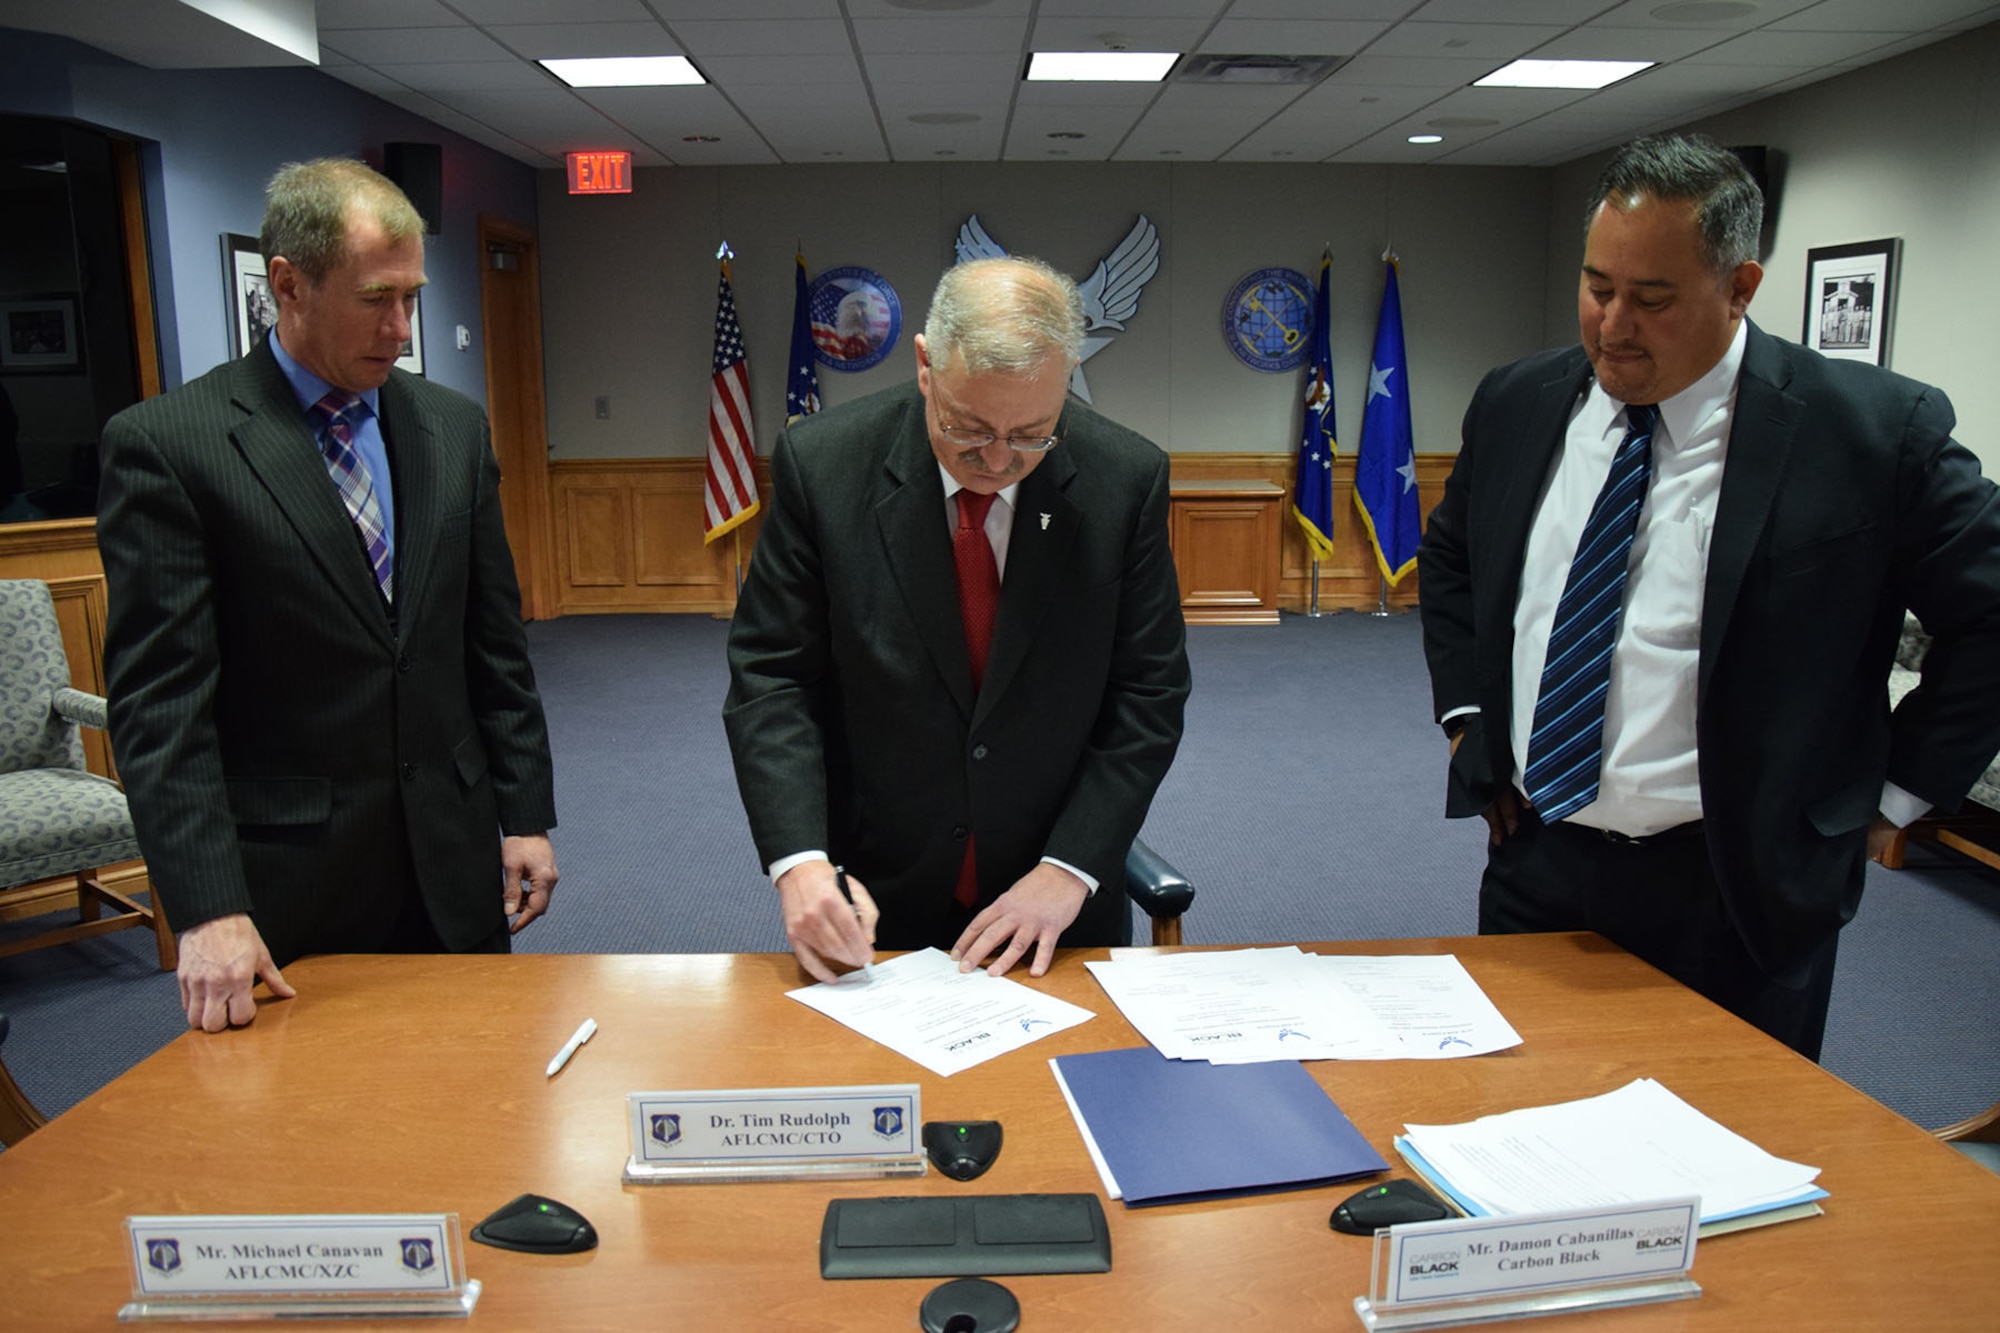 Dr. Tim Rudolph, center, former Air Force Life Cycle Management Center chief technology officer, signs the paperwork for a Cooperative Research and Development Agreement with Carbon Black, March 15 at Hanscom Air Force Base, Mass., while Michael Canavan, left,  Electronic Systems Development Division chief, and Damon Cabanillas, vice president of federal sales and operations, Carbon Black, look on. The Electronic Systems Development Division signed a CRADA with Carbon Black to enable deployment of advanced endpoint security technology on the Hanscom Collaboration and Innovation Center to improve cybersecurity.  (U.S. Air Force photo)